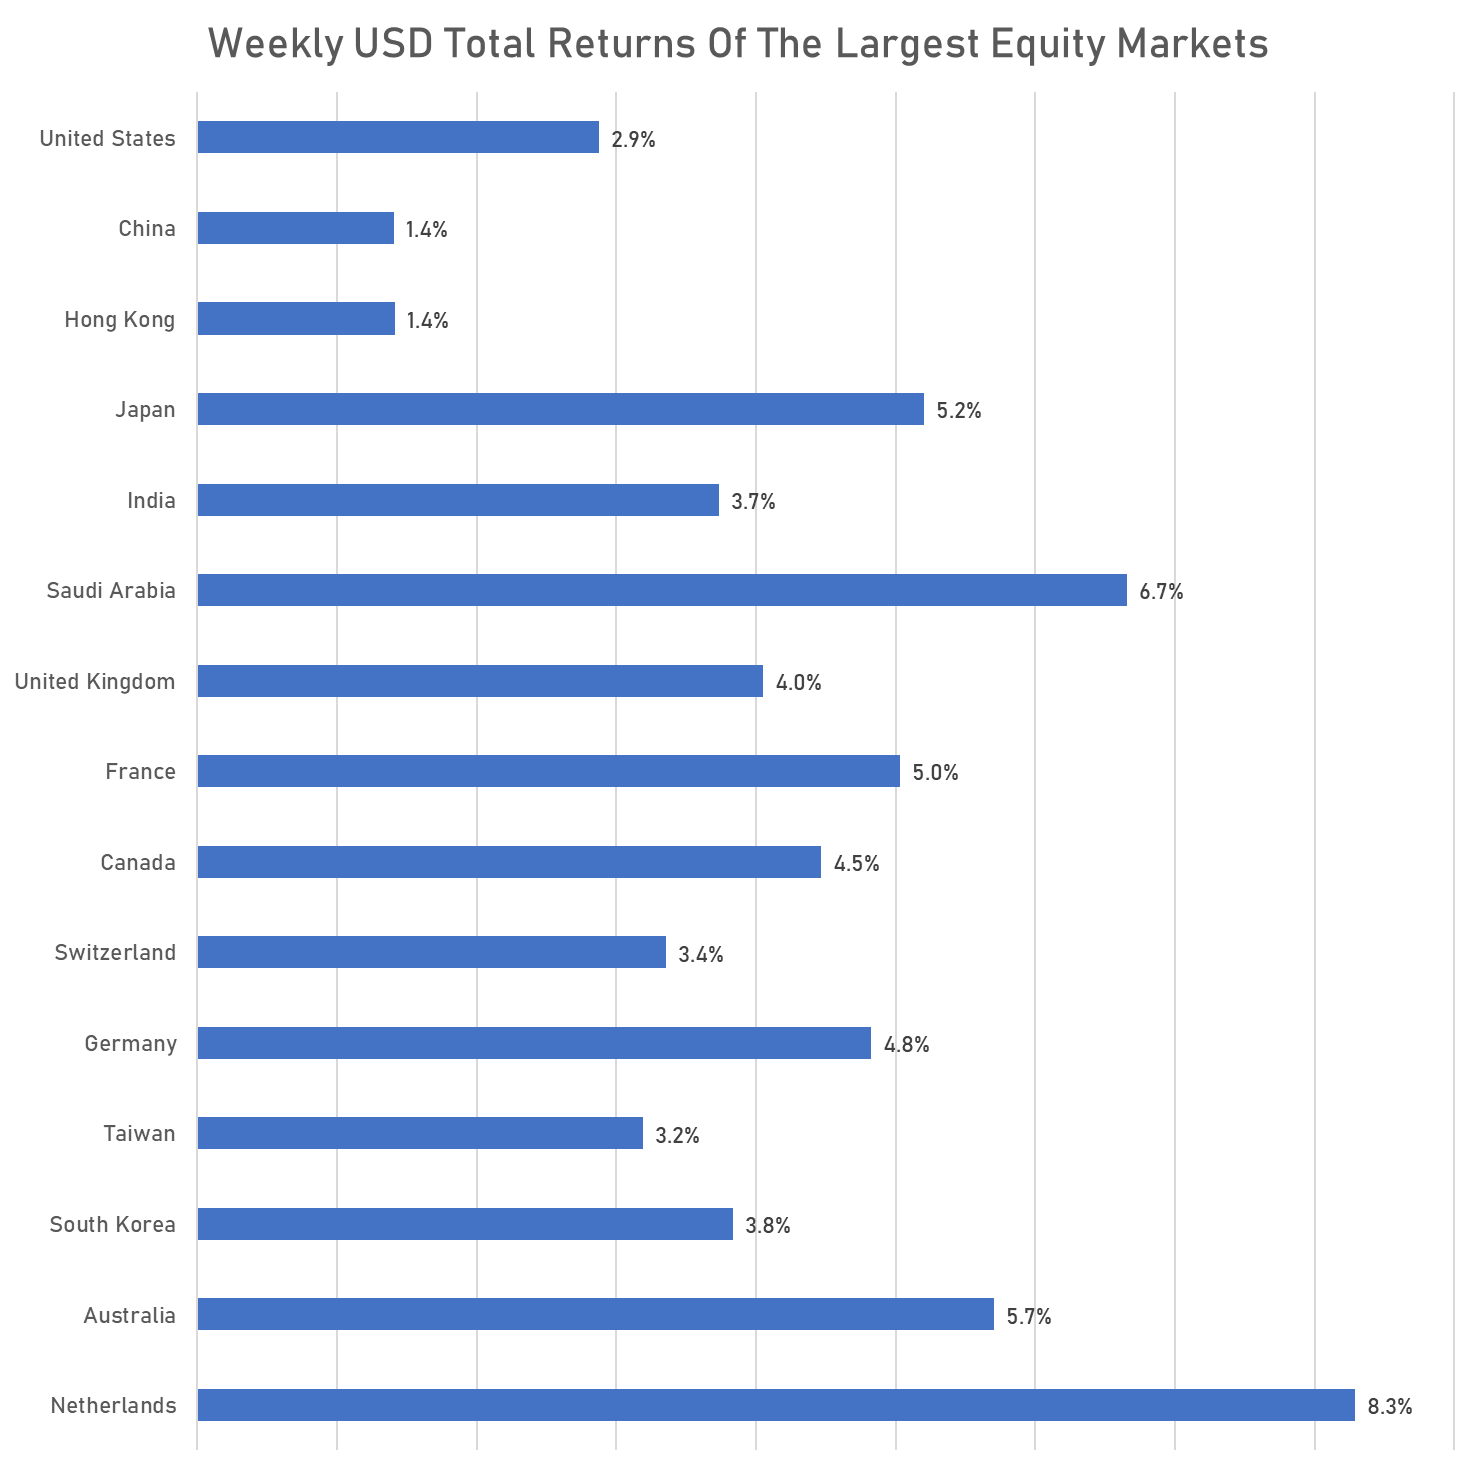 Weekly total returns of major equity markets | Sources: phipost.com, FactSet data